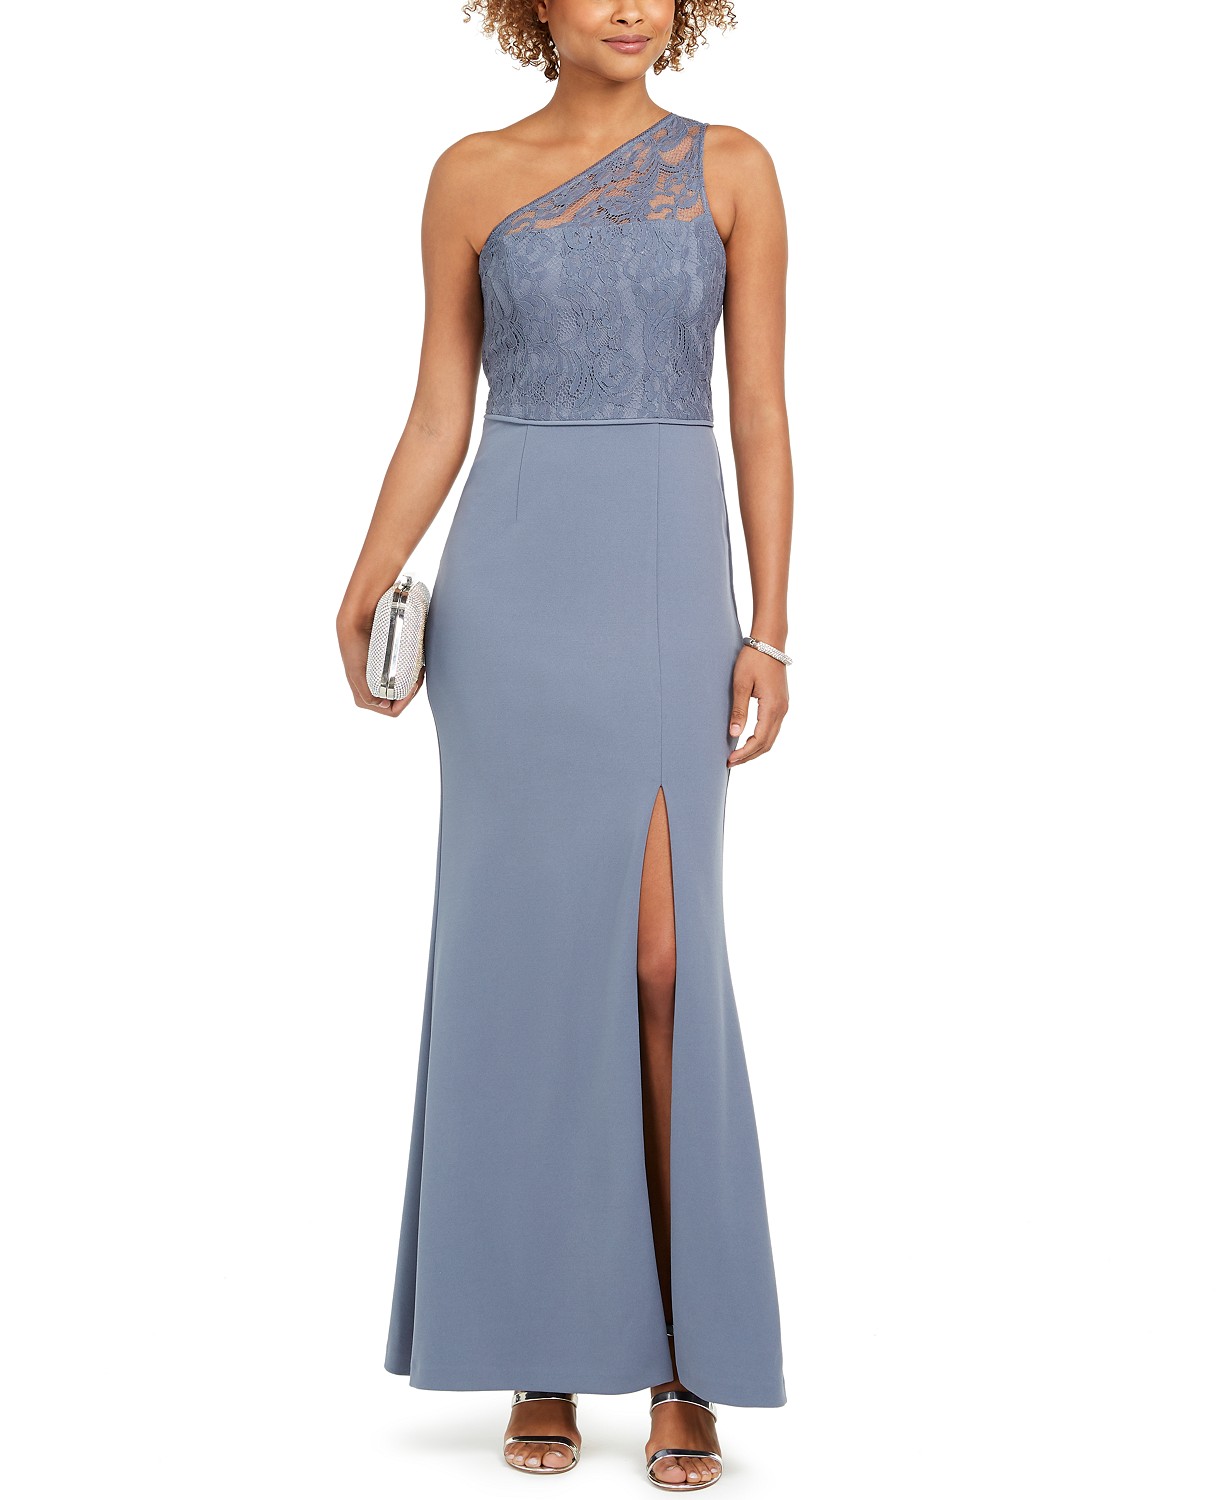 woocommerce-673321-2209615.cloudwaysapps.com-adrianna-papell-womens-dusty-blue-one-shoulder-lace-gown-dress